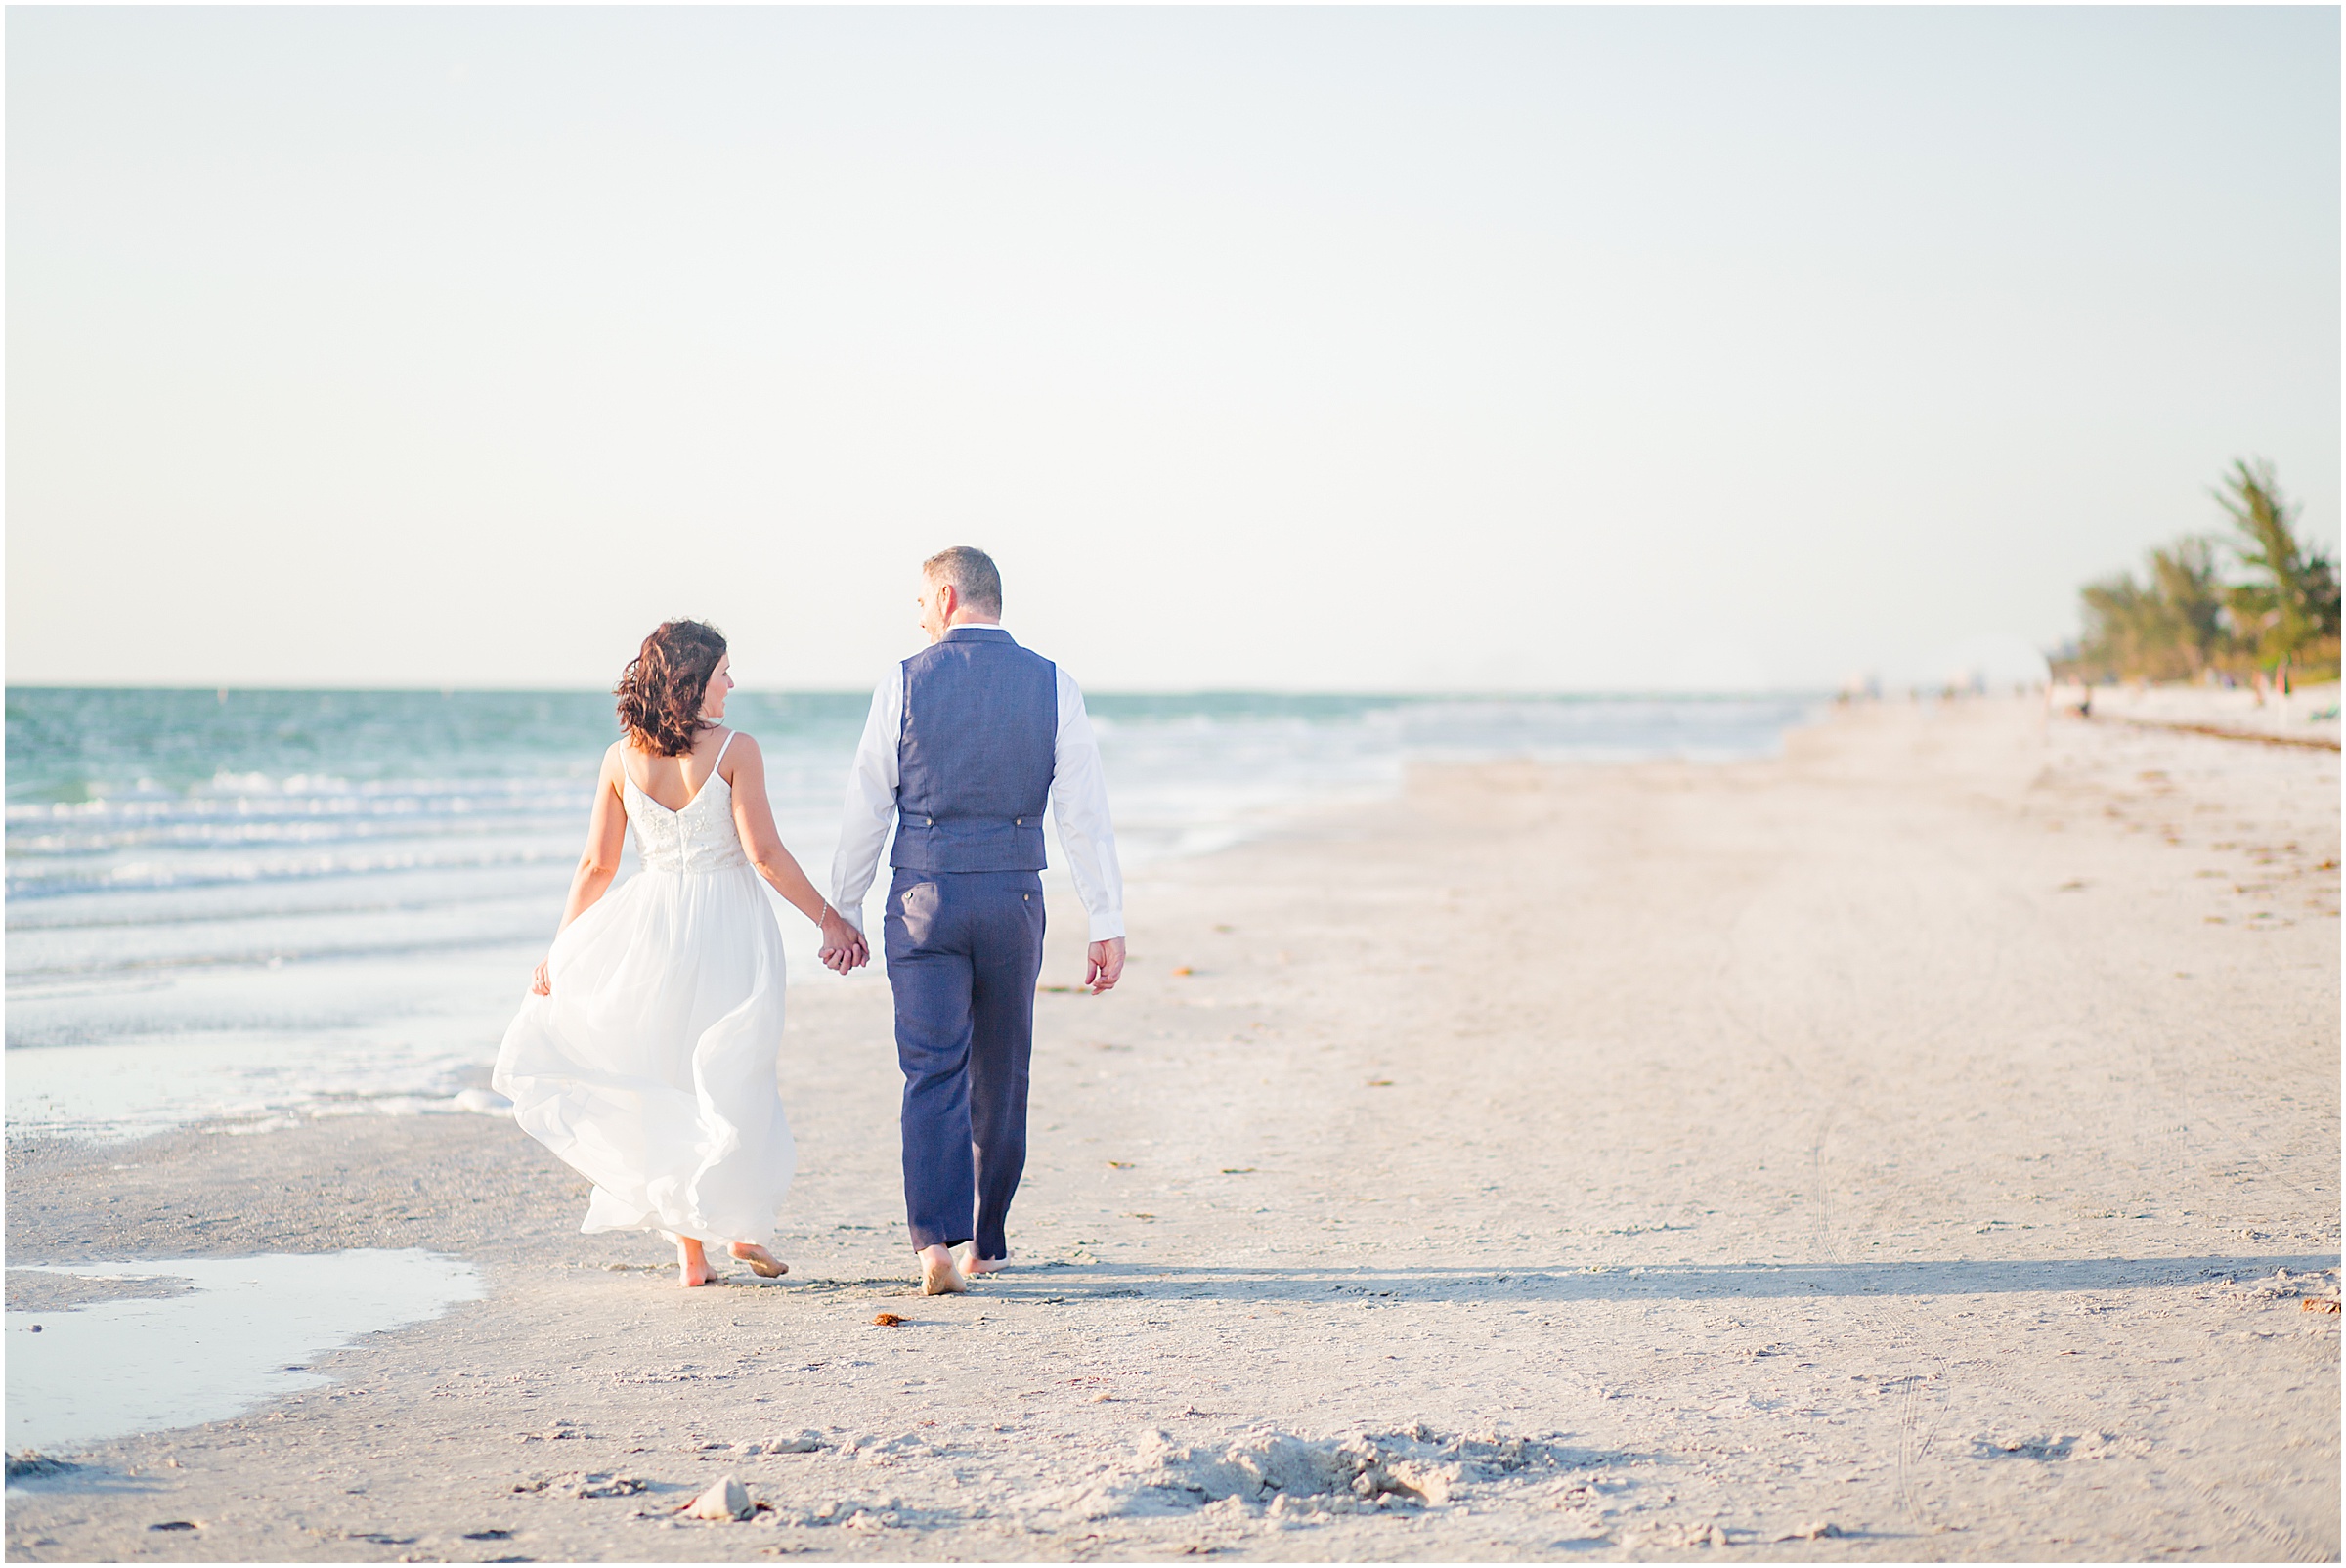 Paige & Chris Chance get married at their intimate beach elopement on Indian Rocks Beach Florida.